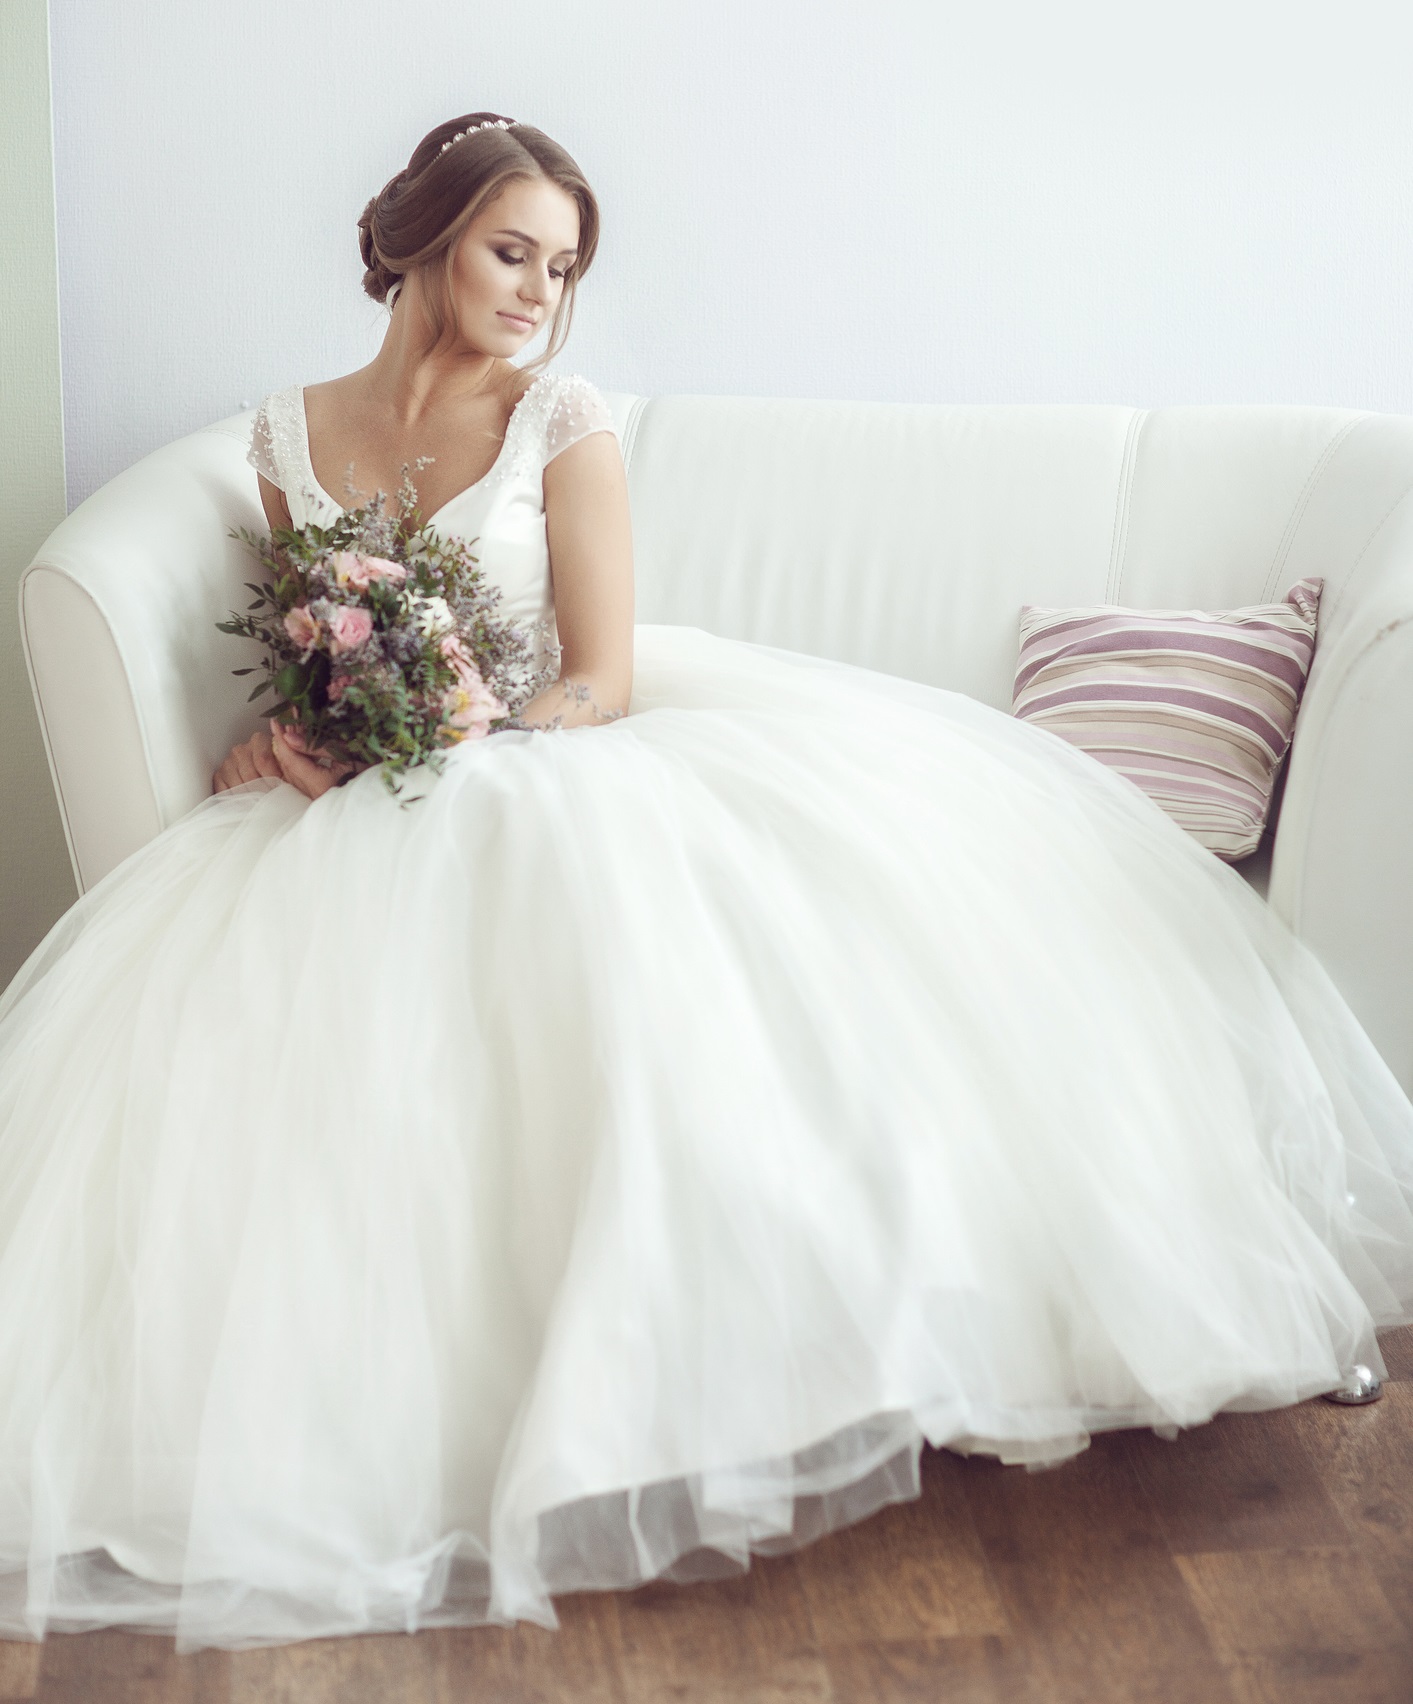 Bride on chair